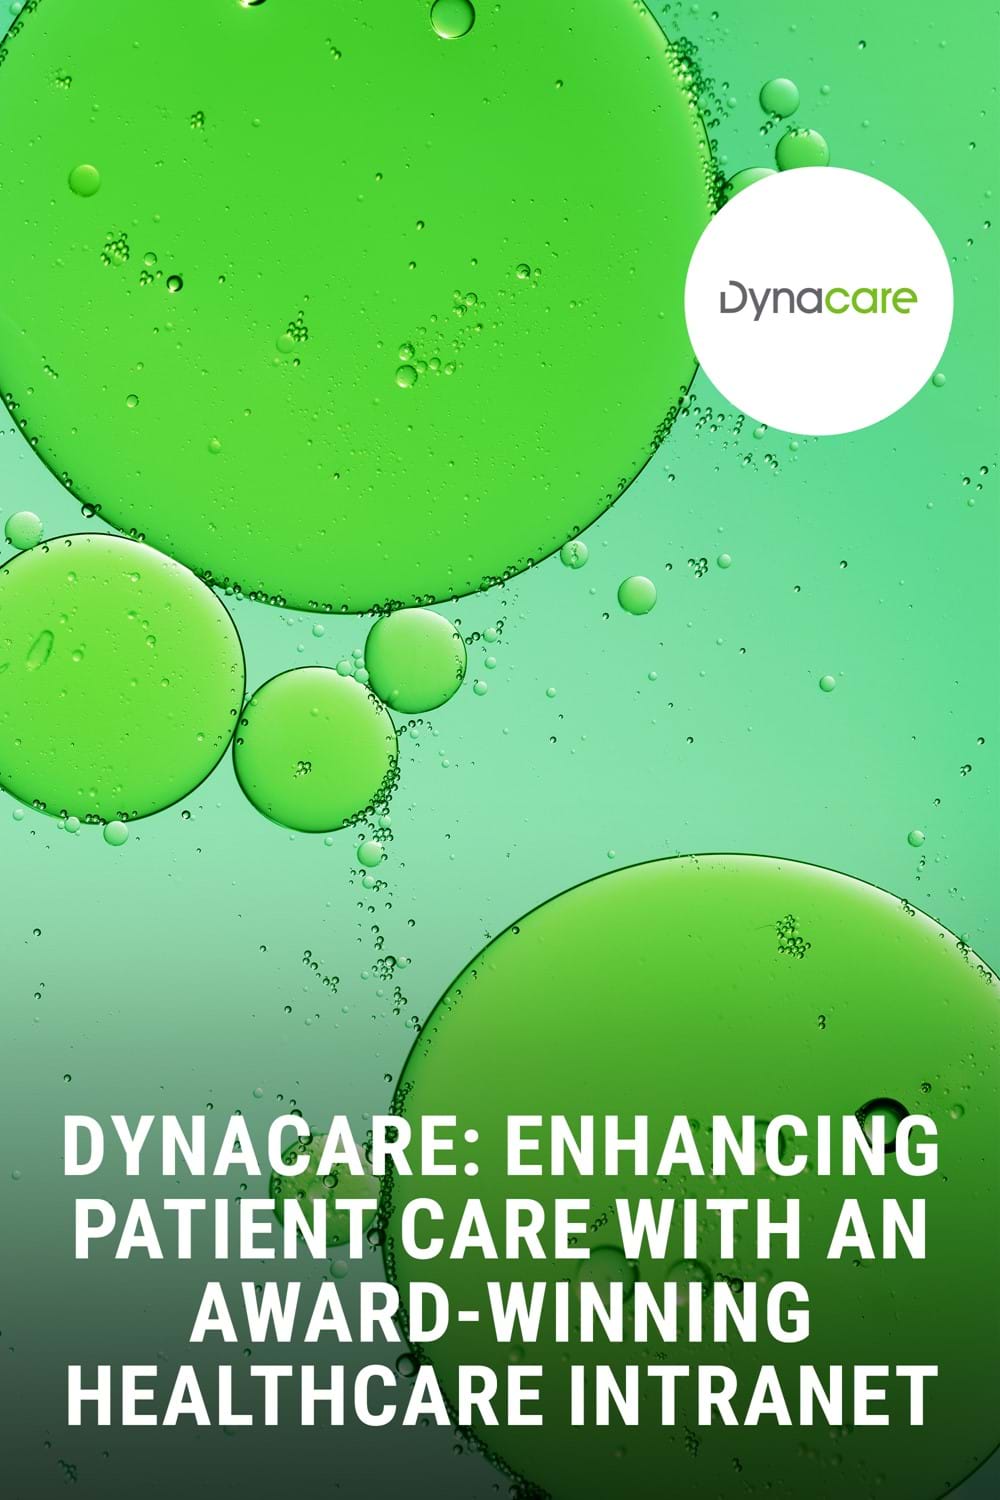 'Dynacare enhance patient care with an award-winning healthcare intranet' Guide front cover